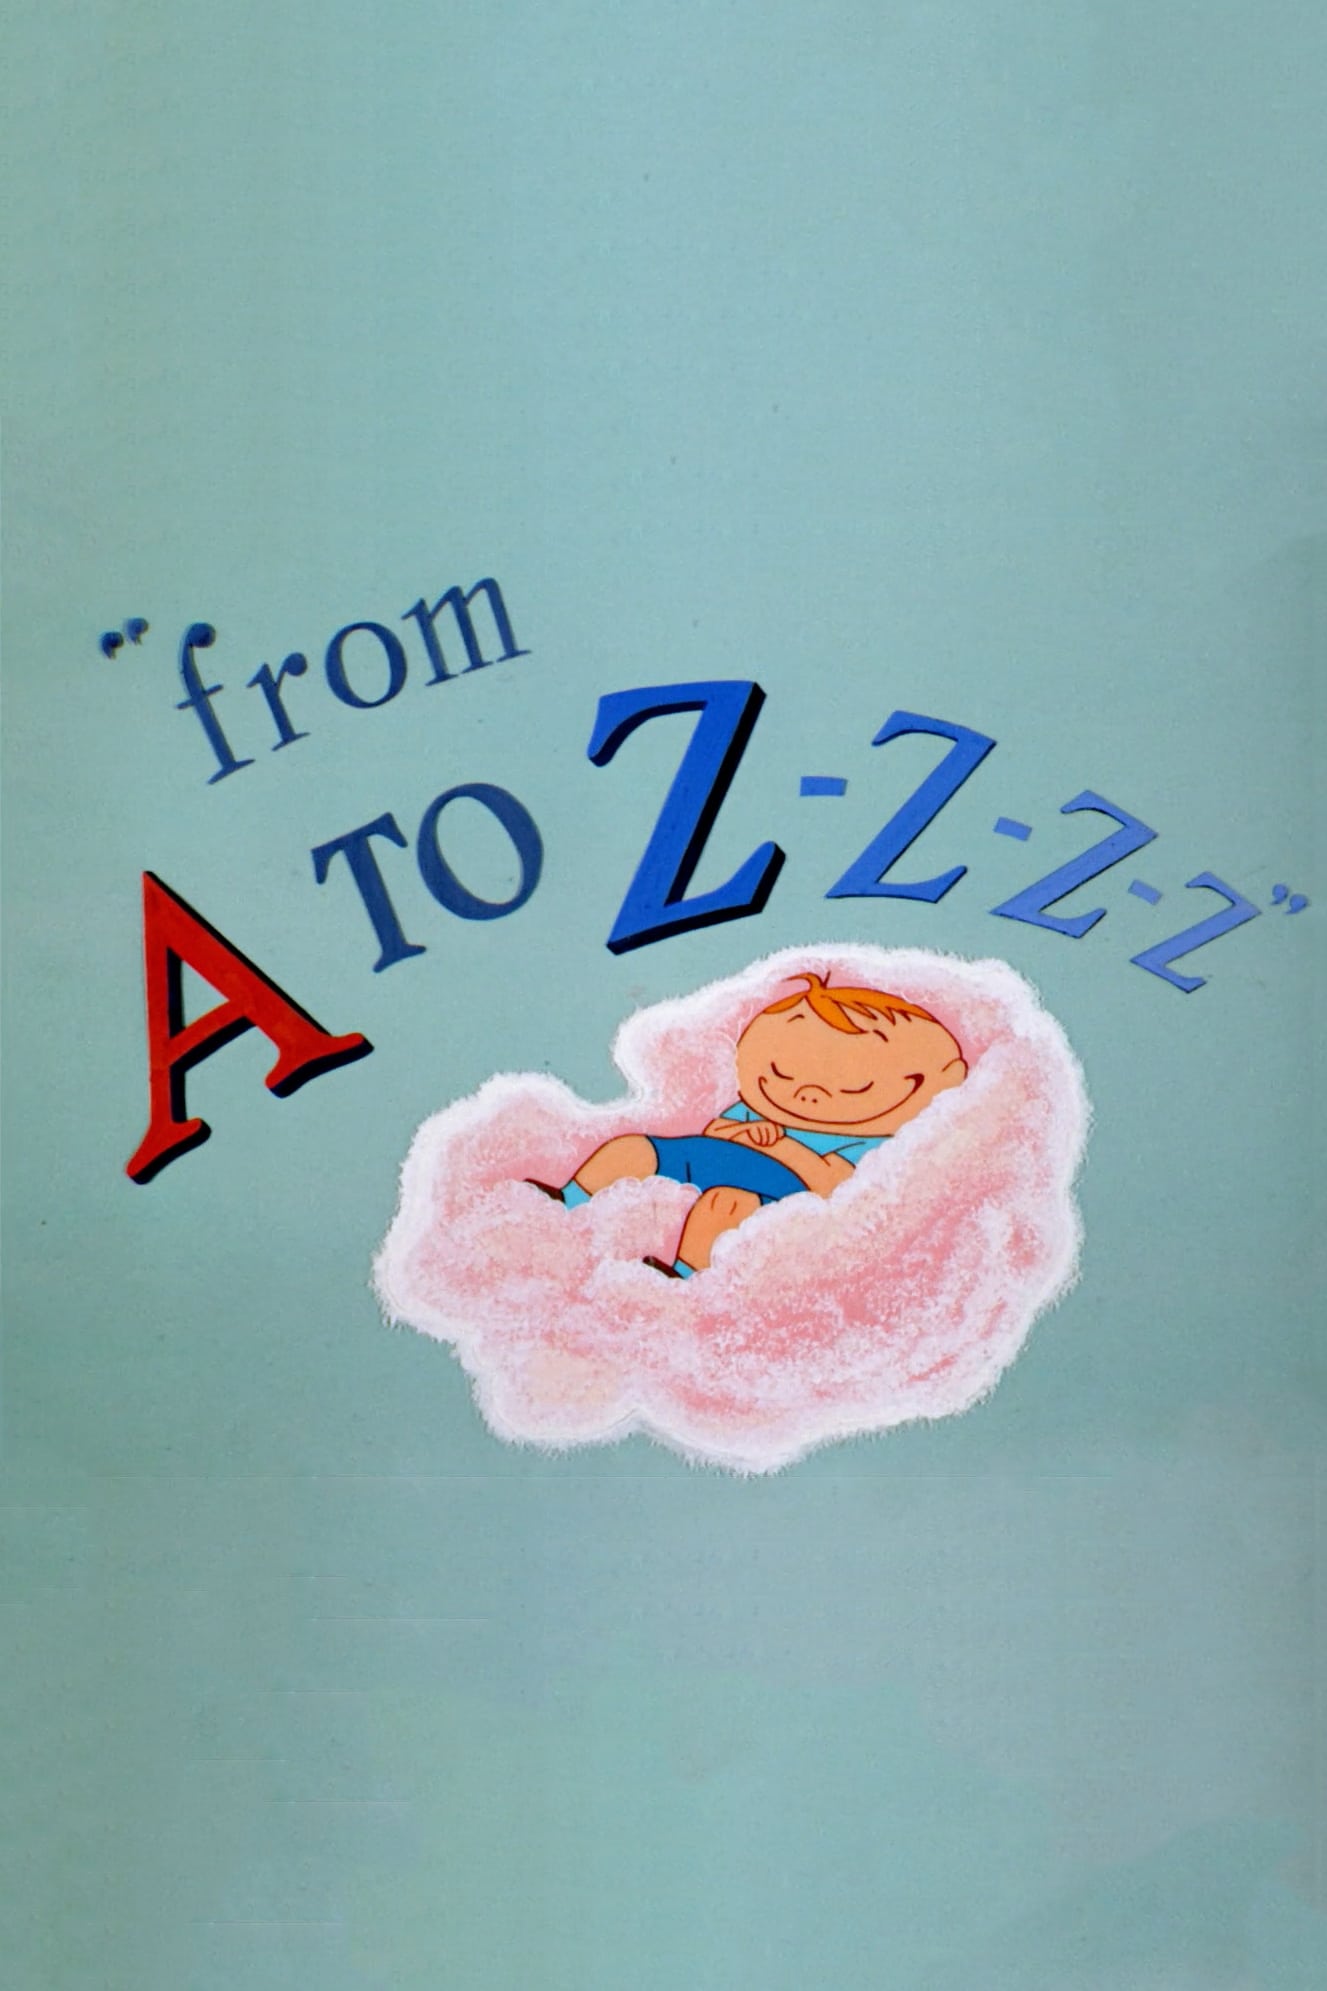 From A to Z-Z-Z-Z (1954)